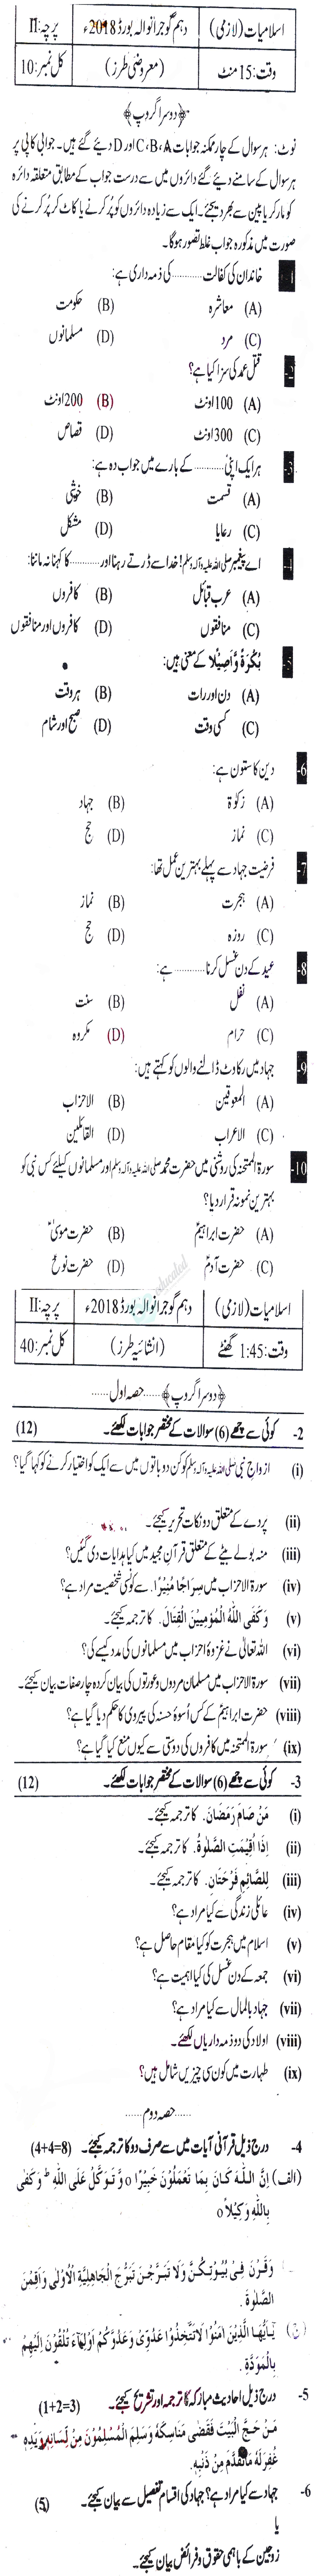 Islamiat (Compulsory) 10th class Past Paper Group 2 BISE Gujranwala 2018